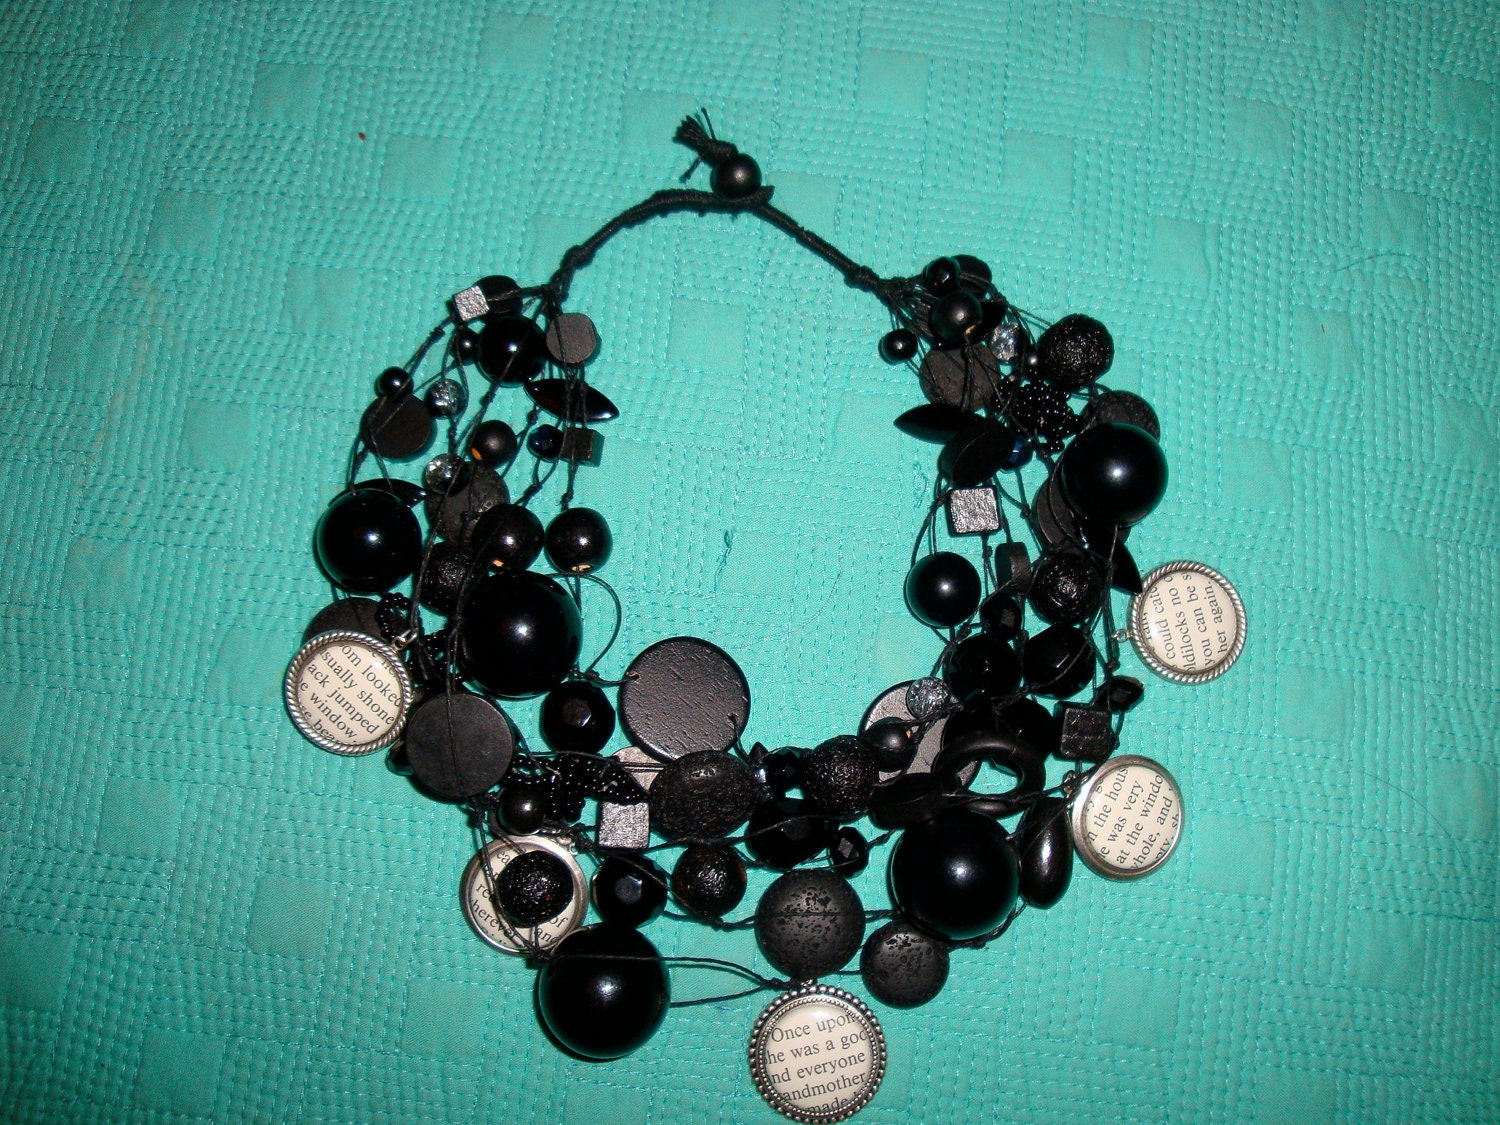 Handmade Bead  statement necklace with charms ( Black, cream, cameos) - creativedesignsstore